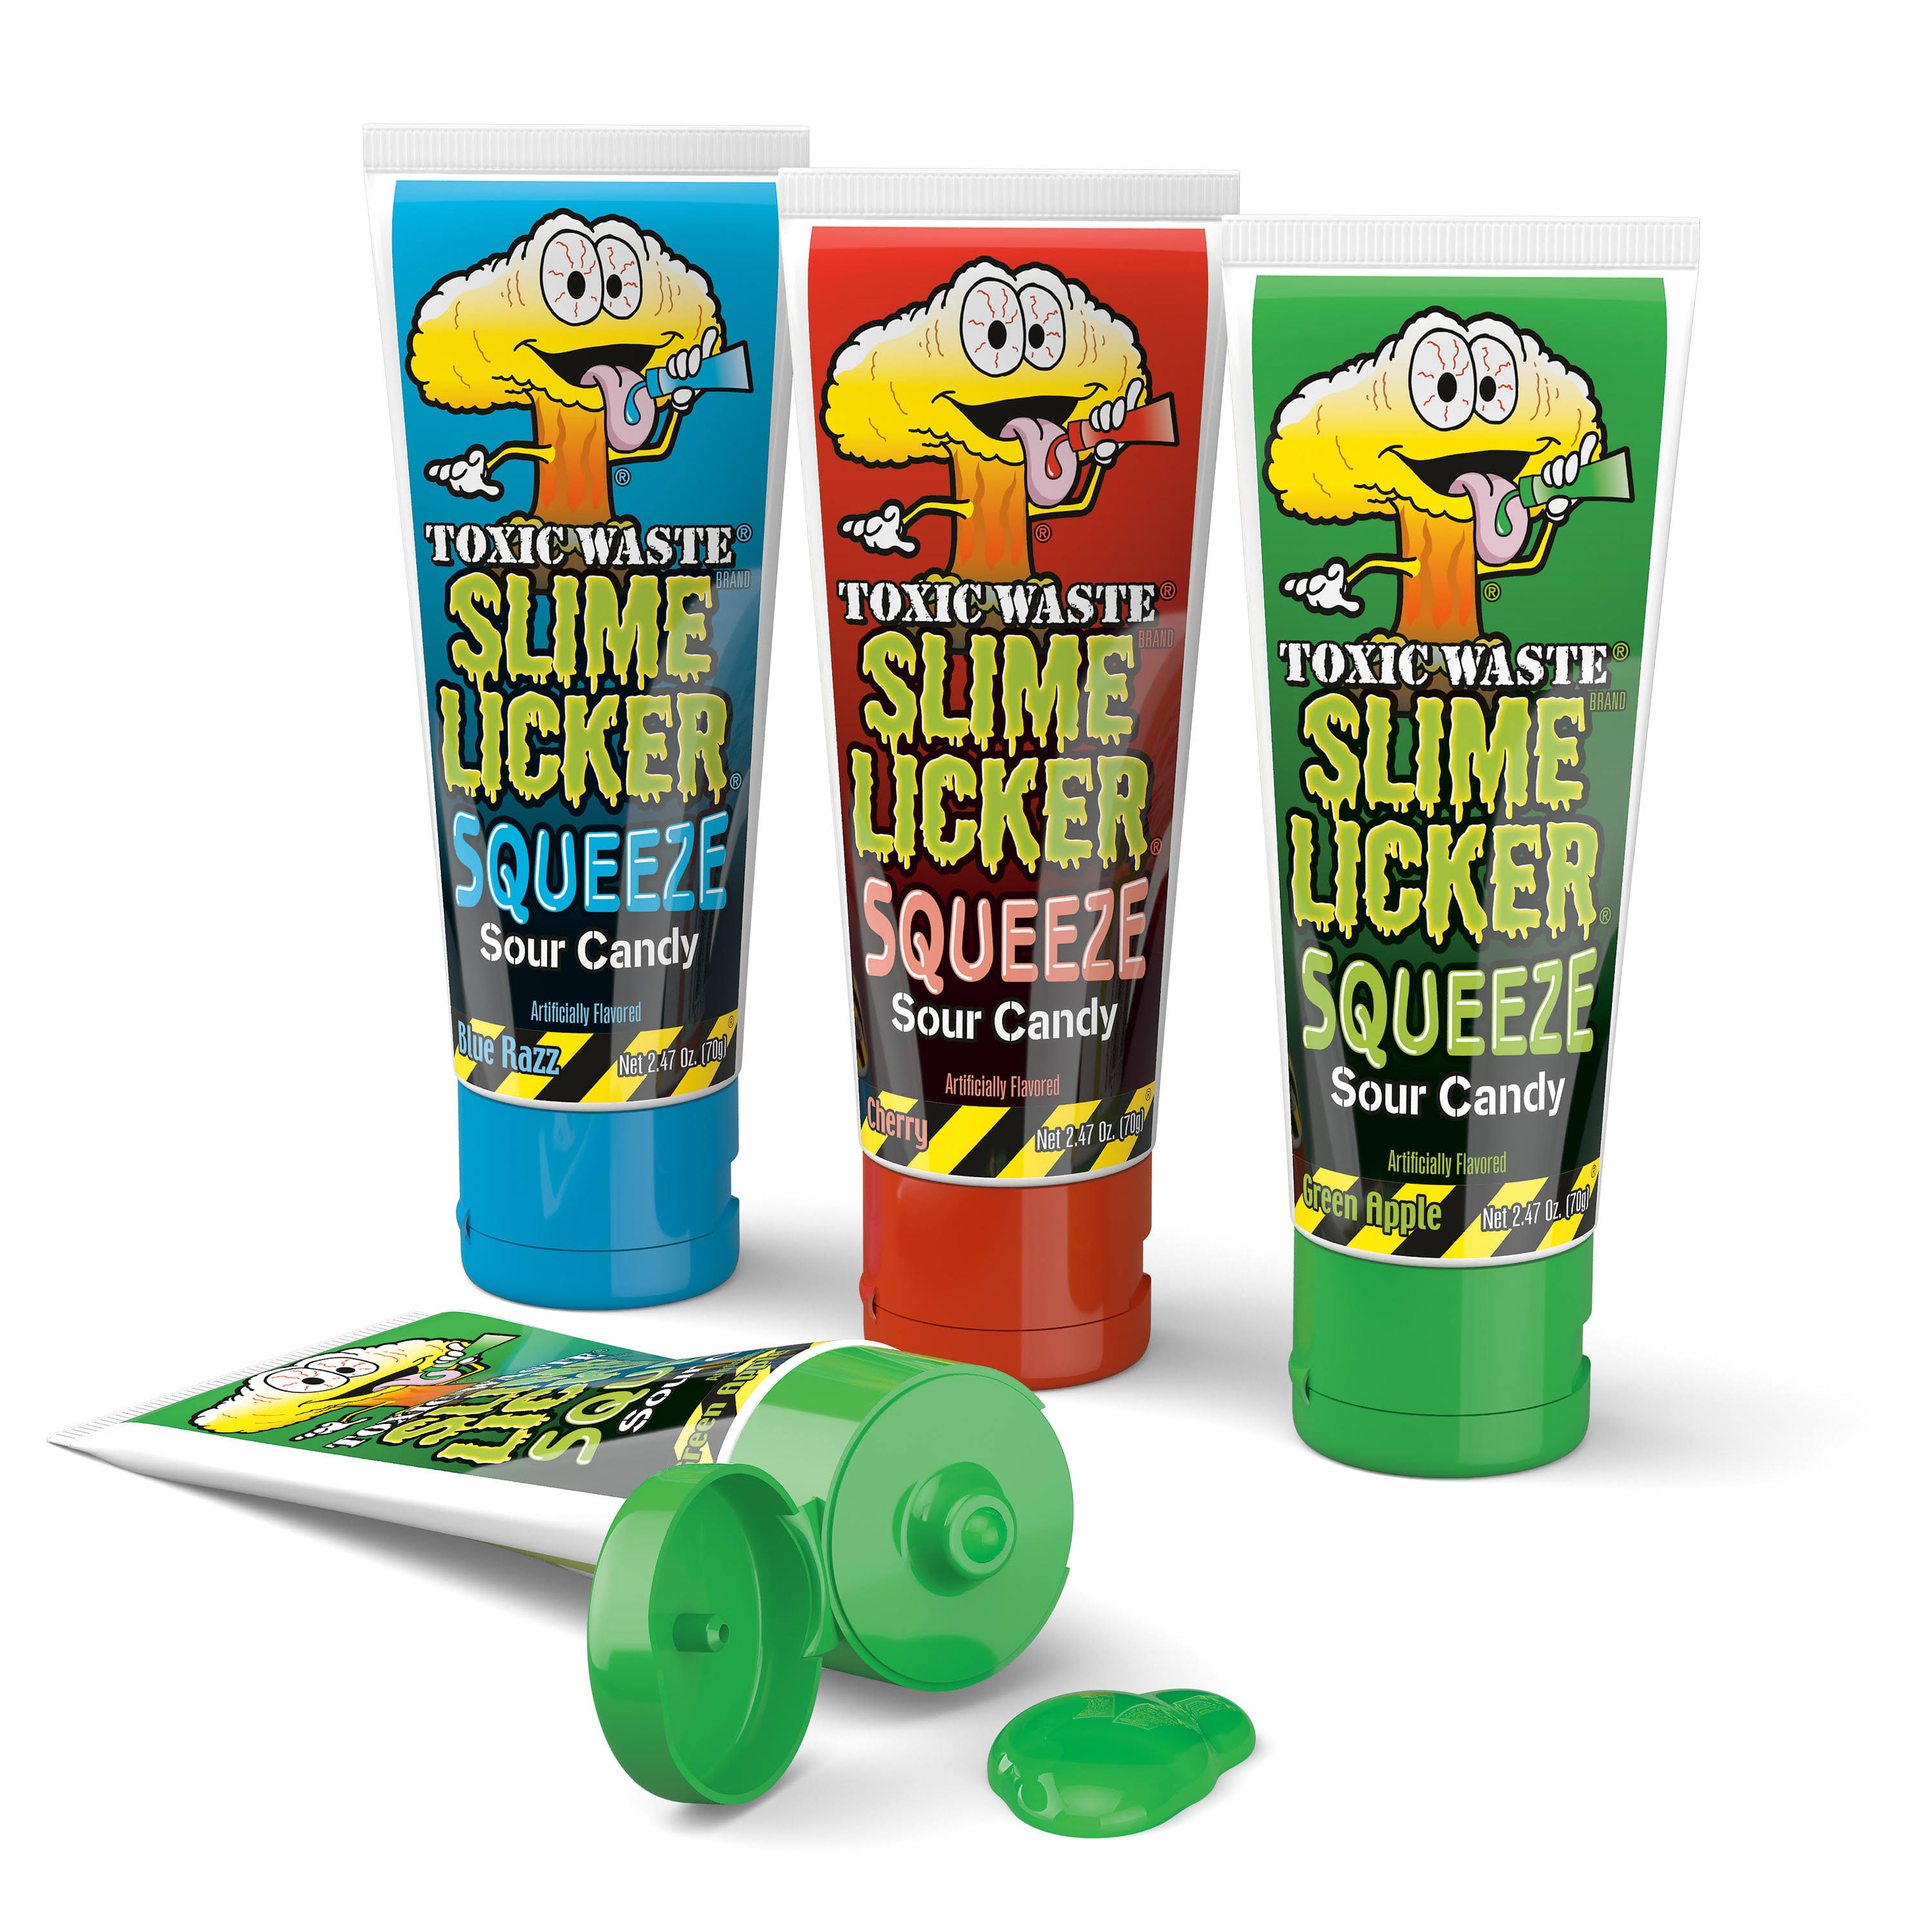 Toxic Waste Slime Licker Squeeze Sour Candy | 12 Count Display with Blue Razz, Cherry, and Green Apple Flavors